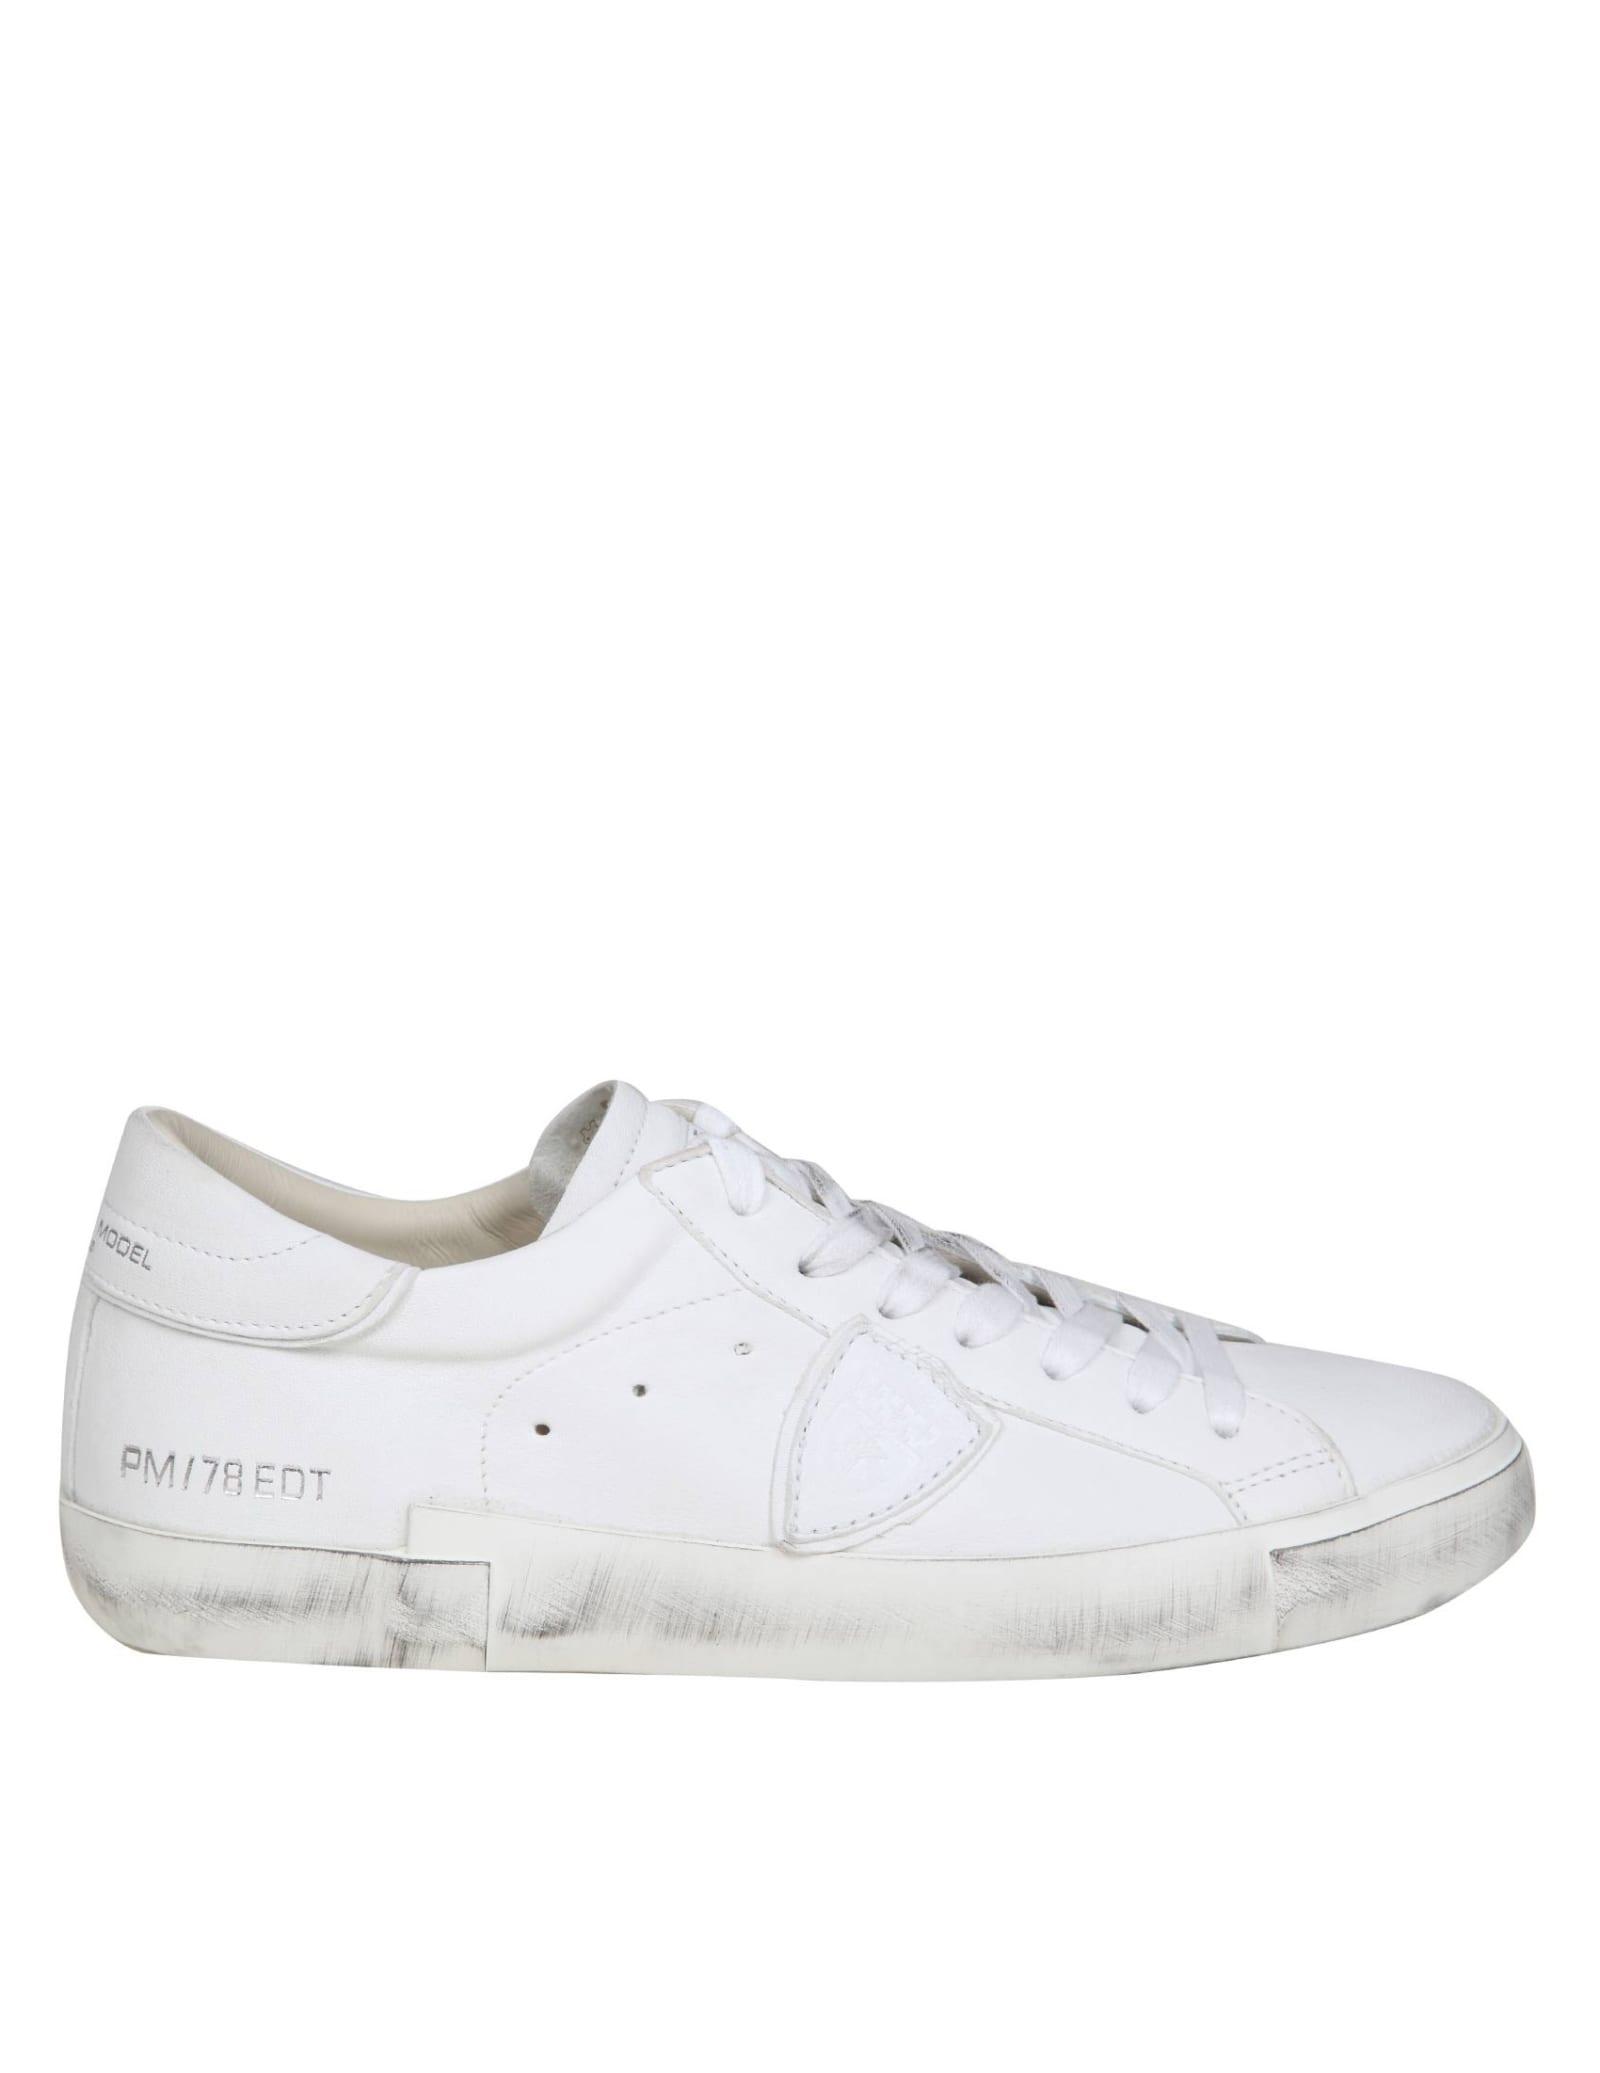 Philippe Model Sneakers Prsx In White Leather for Men | Lyst